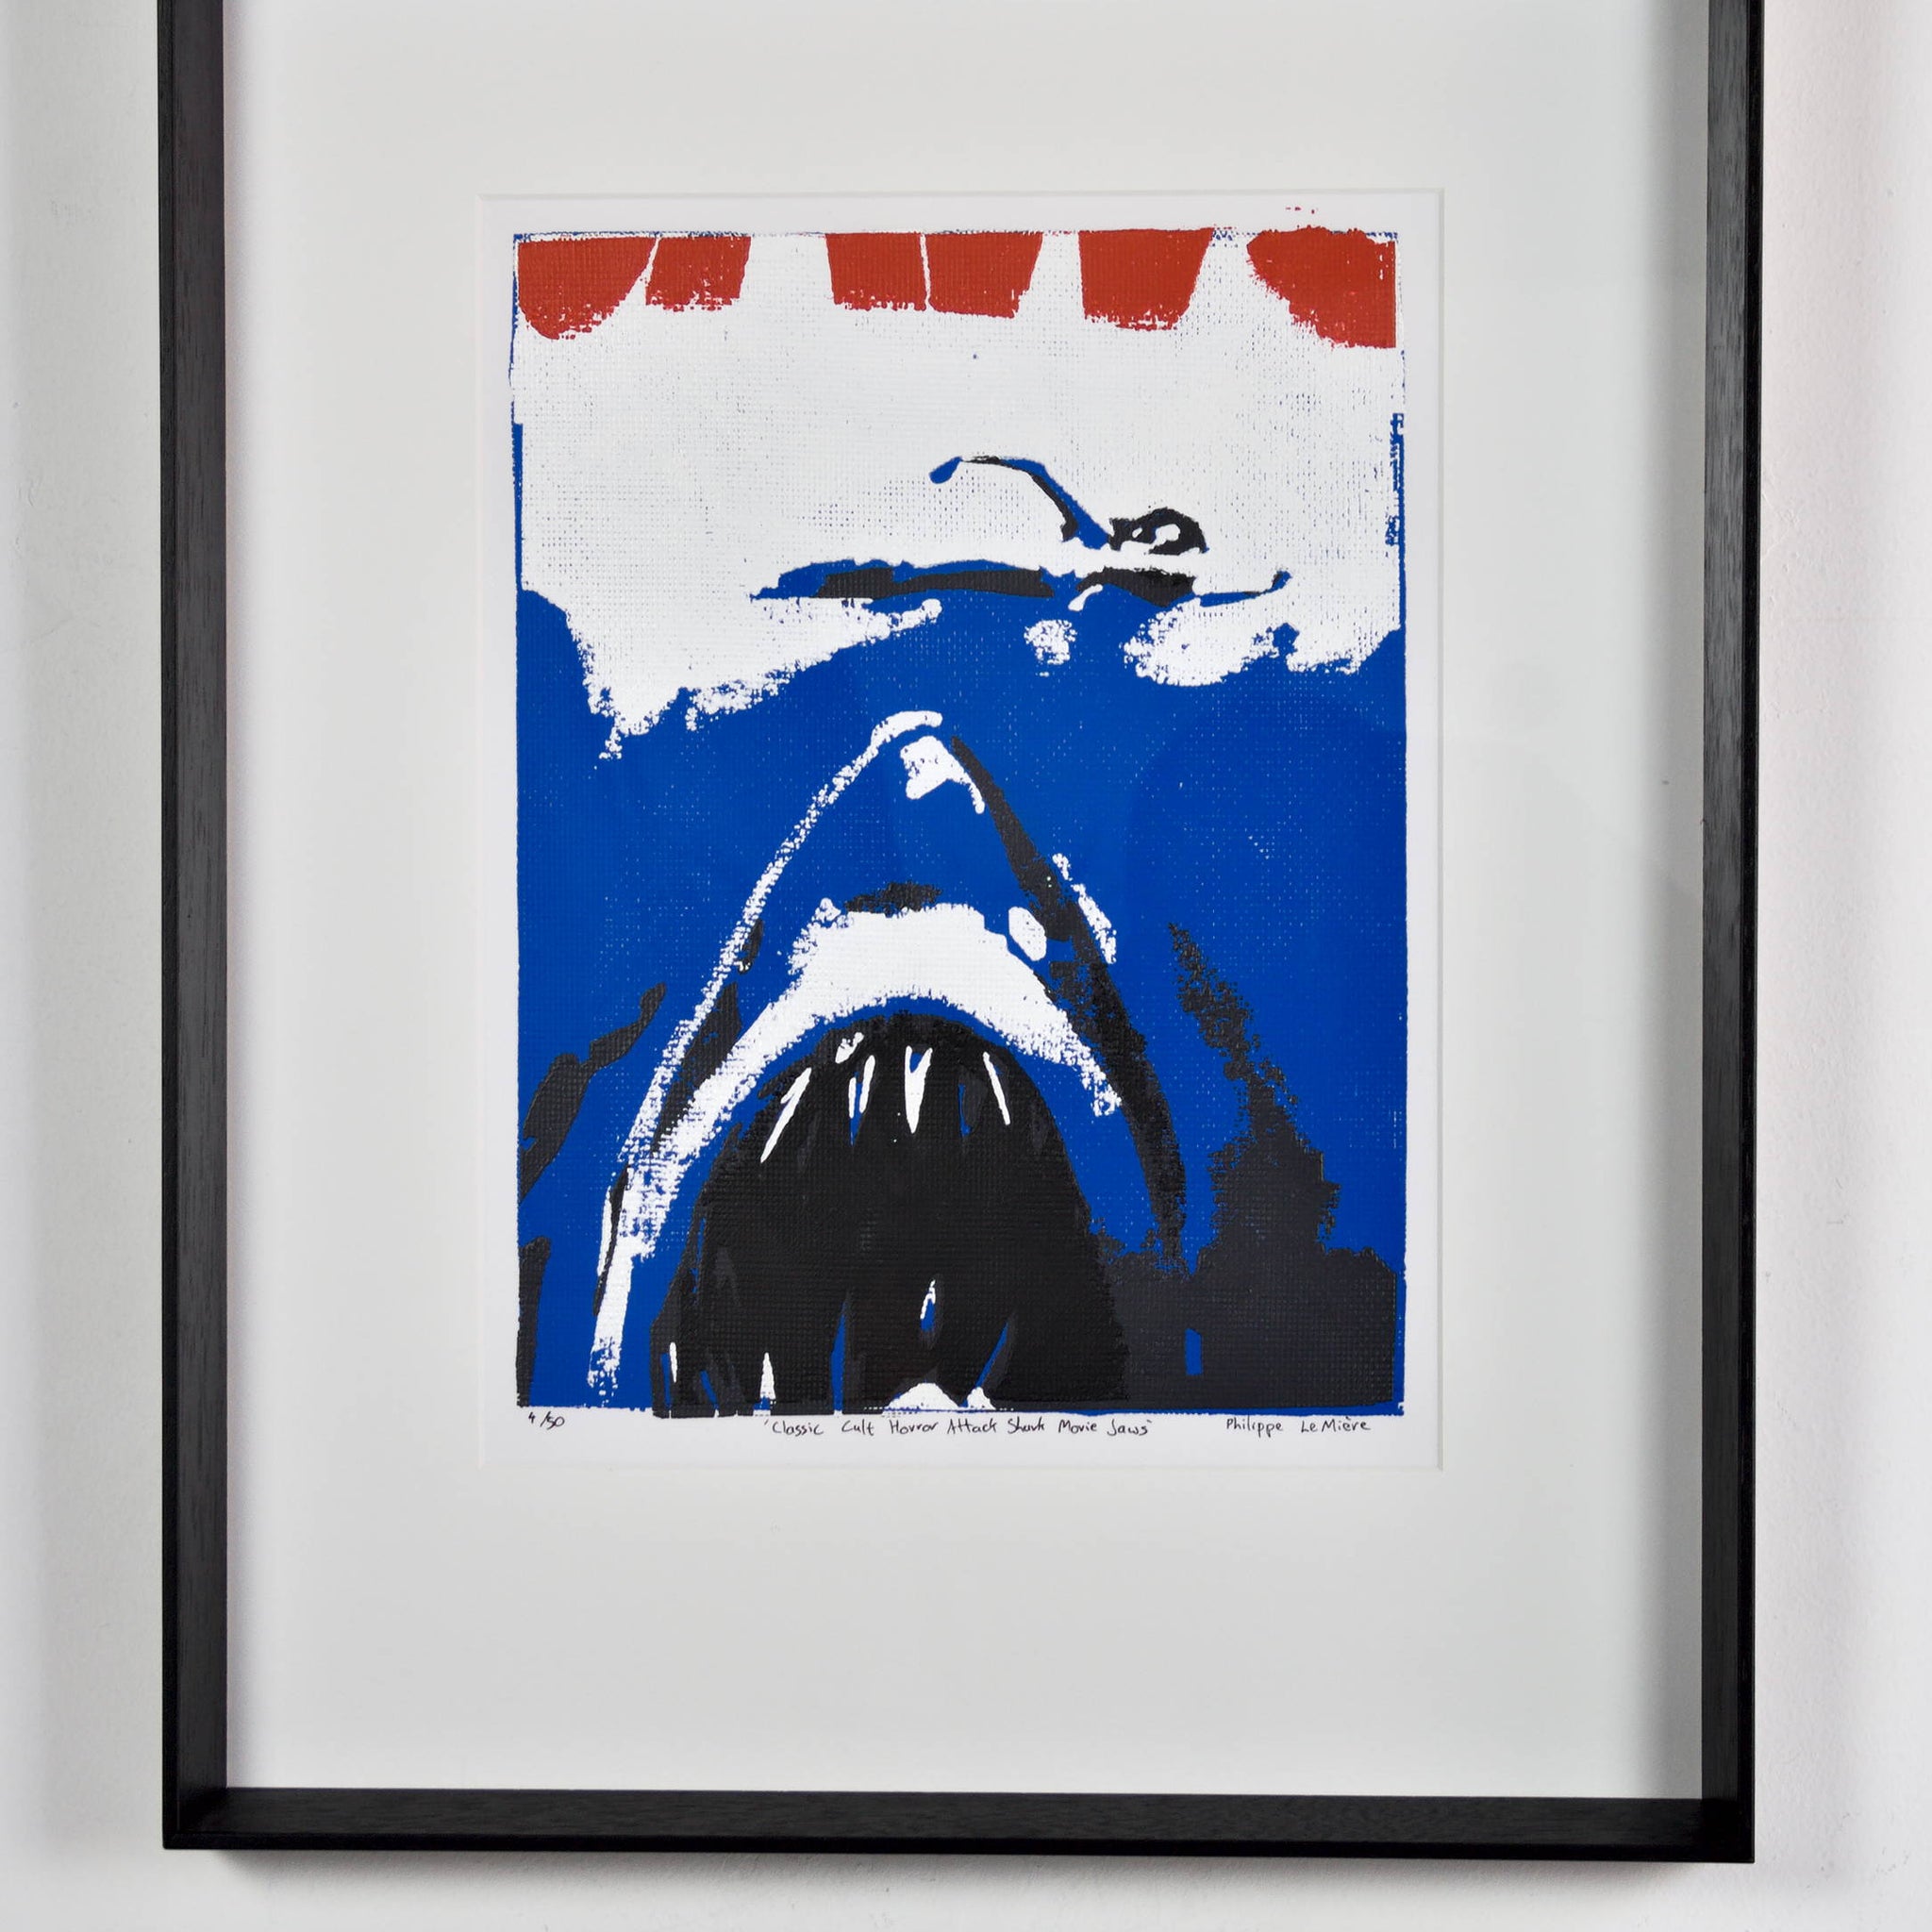 Philippe Le Miere 'Classic Cult Horror Attack Shark Movie Jaws'